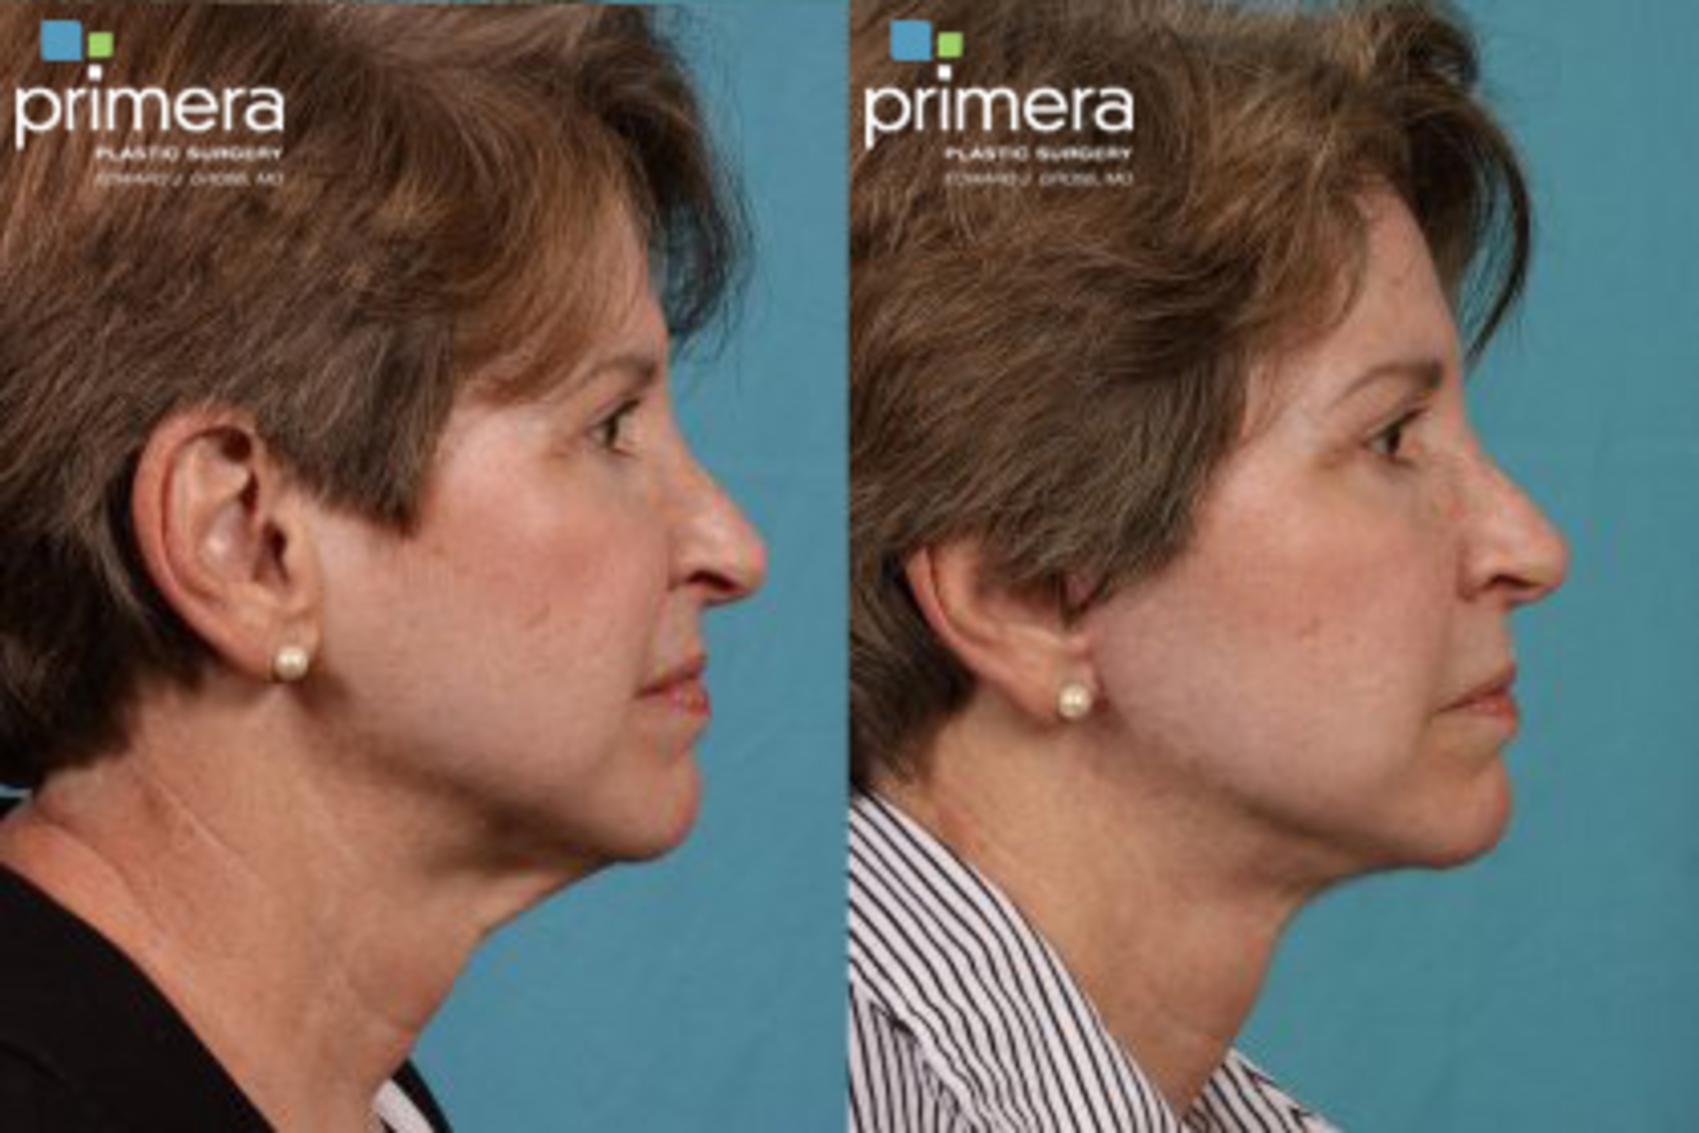 Neck Face Liposuction Before After Photo Gallery Orlando Florida Primera Plastic Surgery